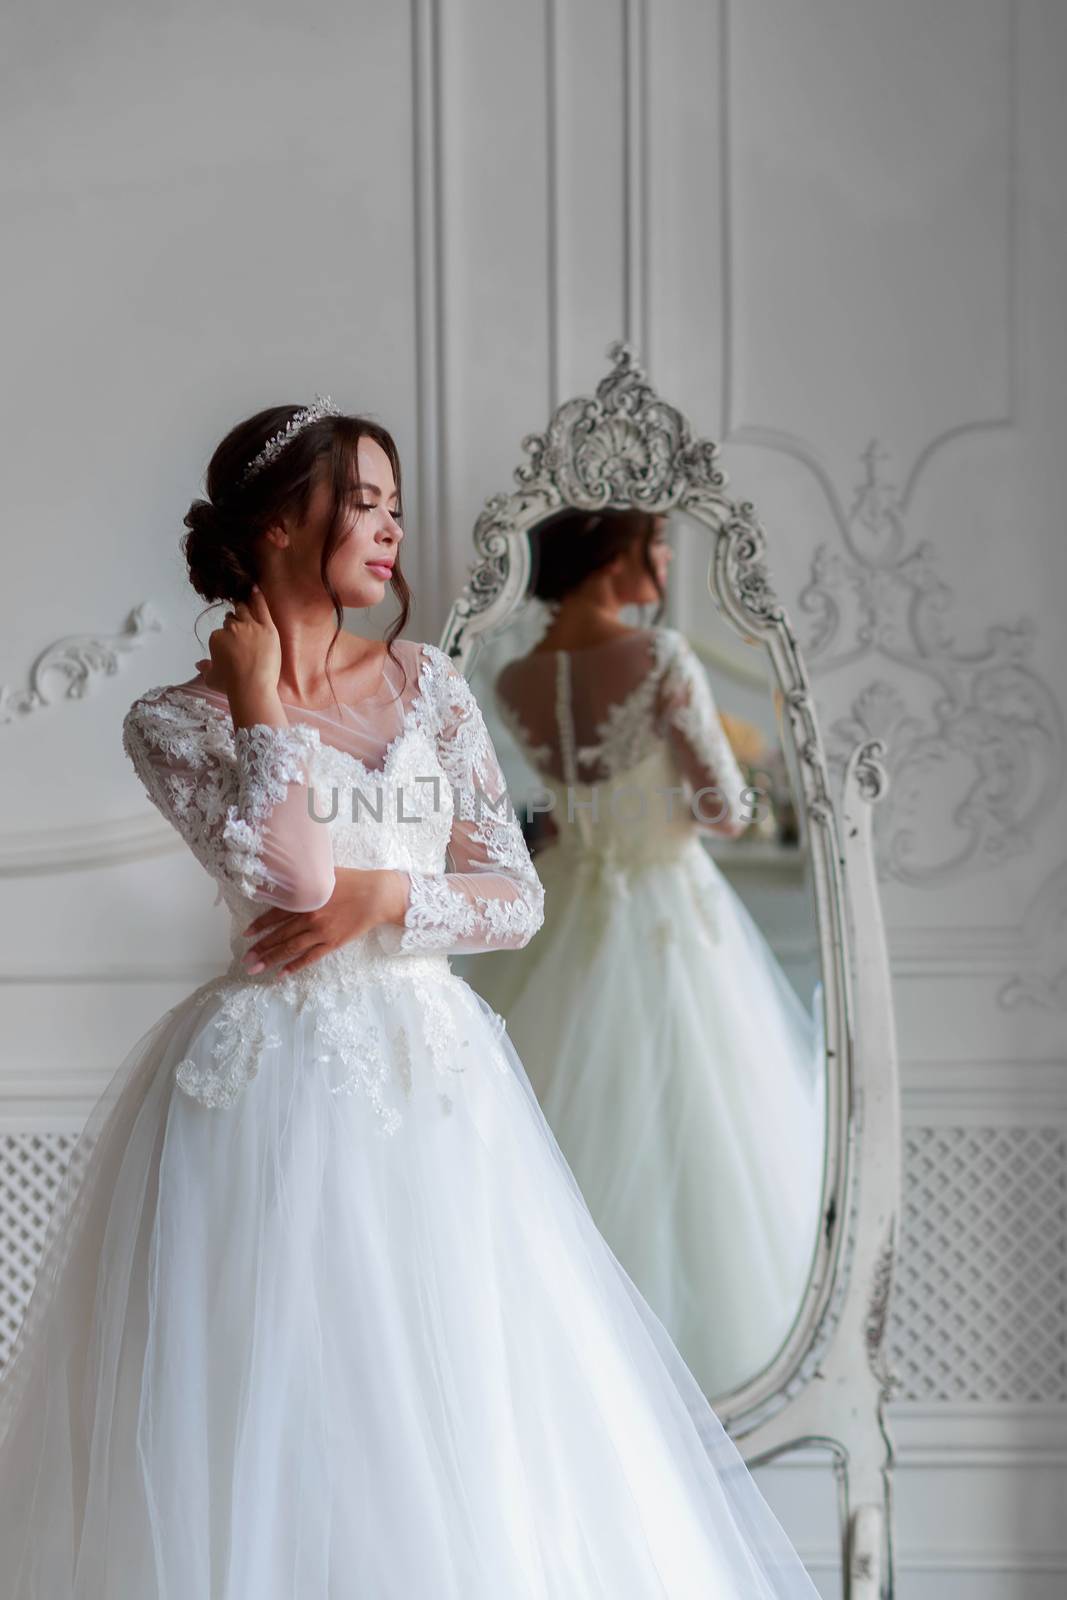 Portrait of a bride in a white wedding dress looks attentively aside.